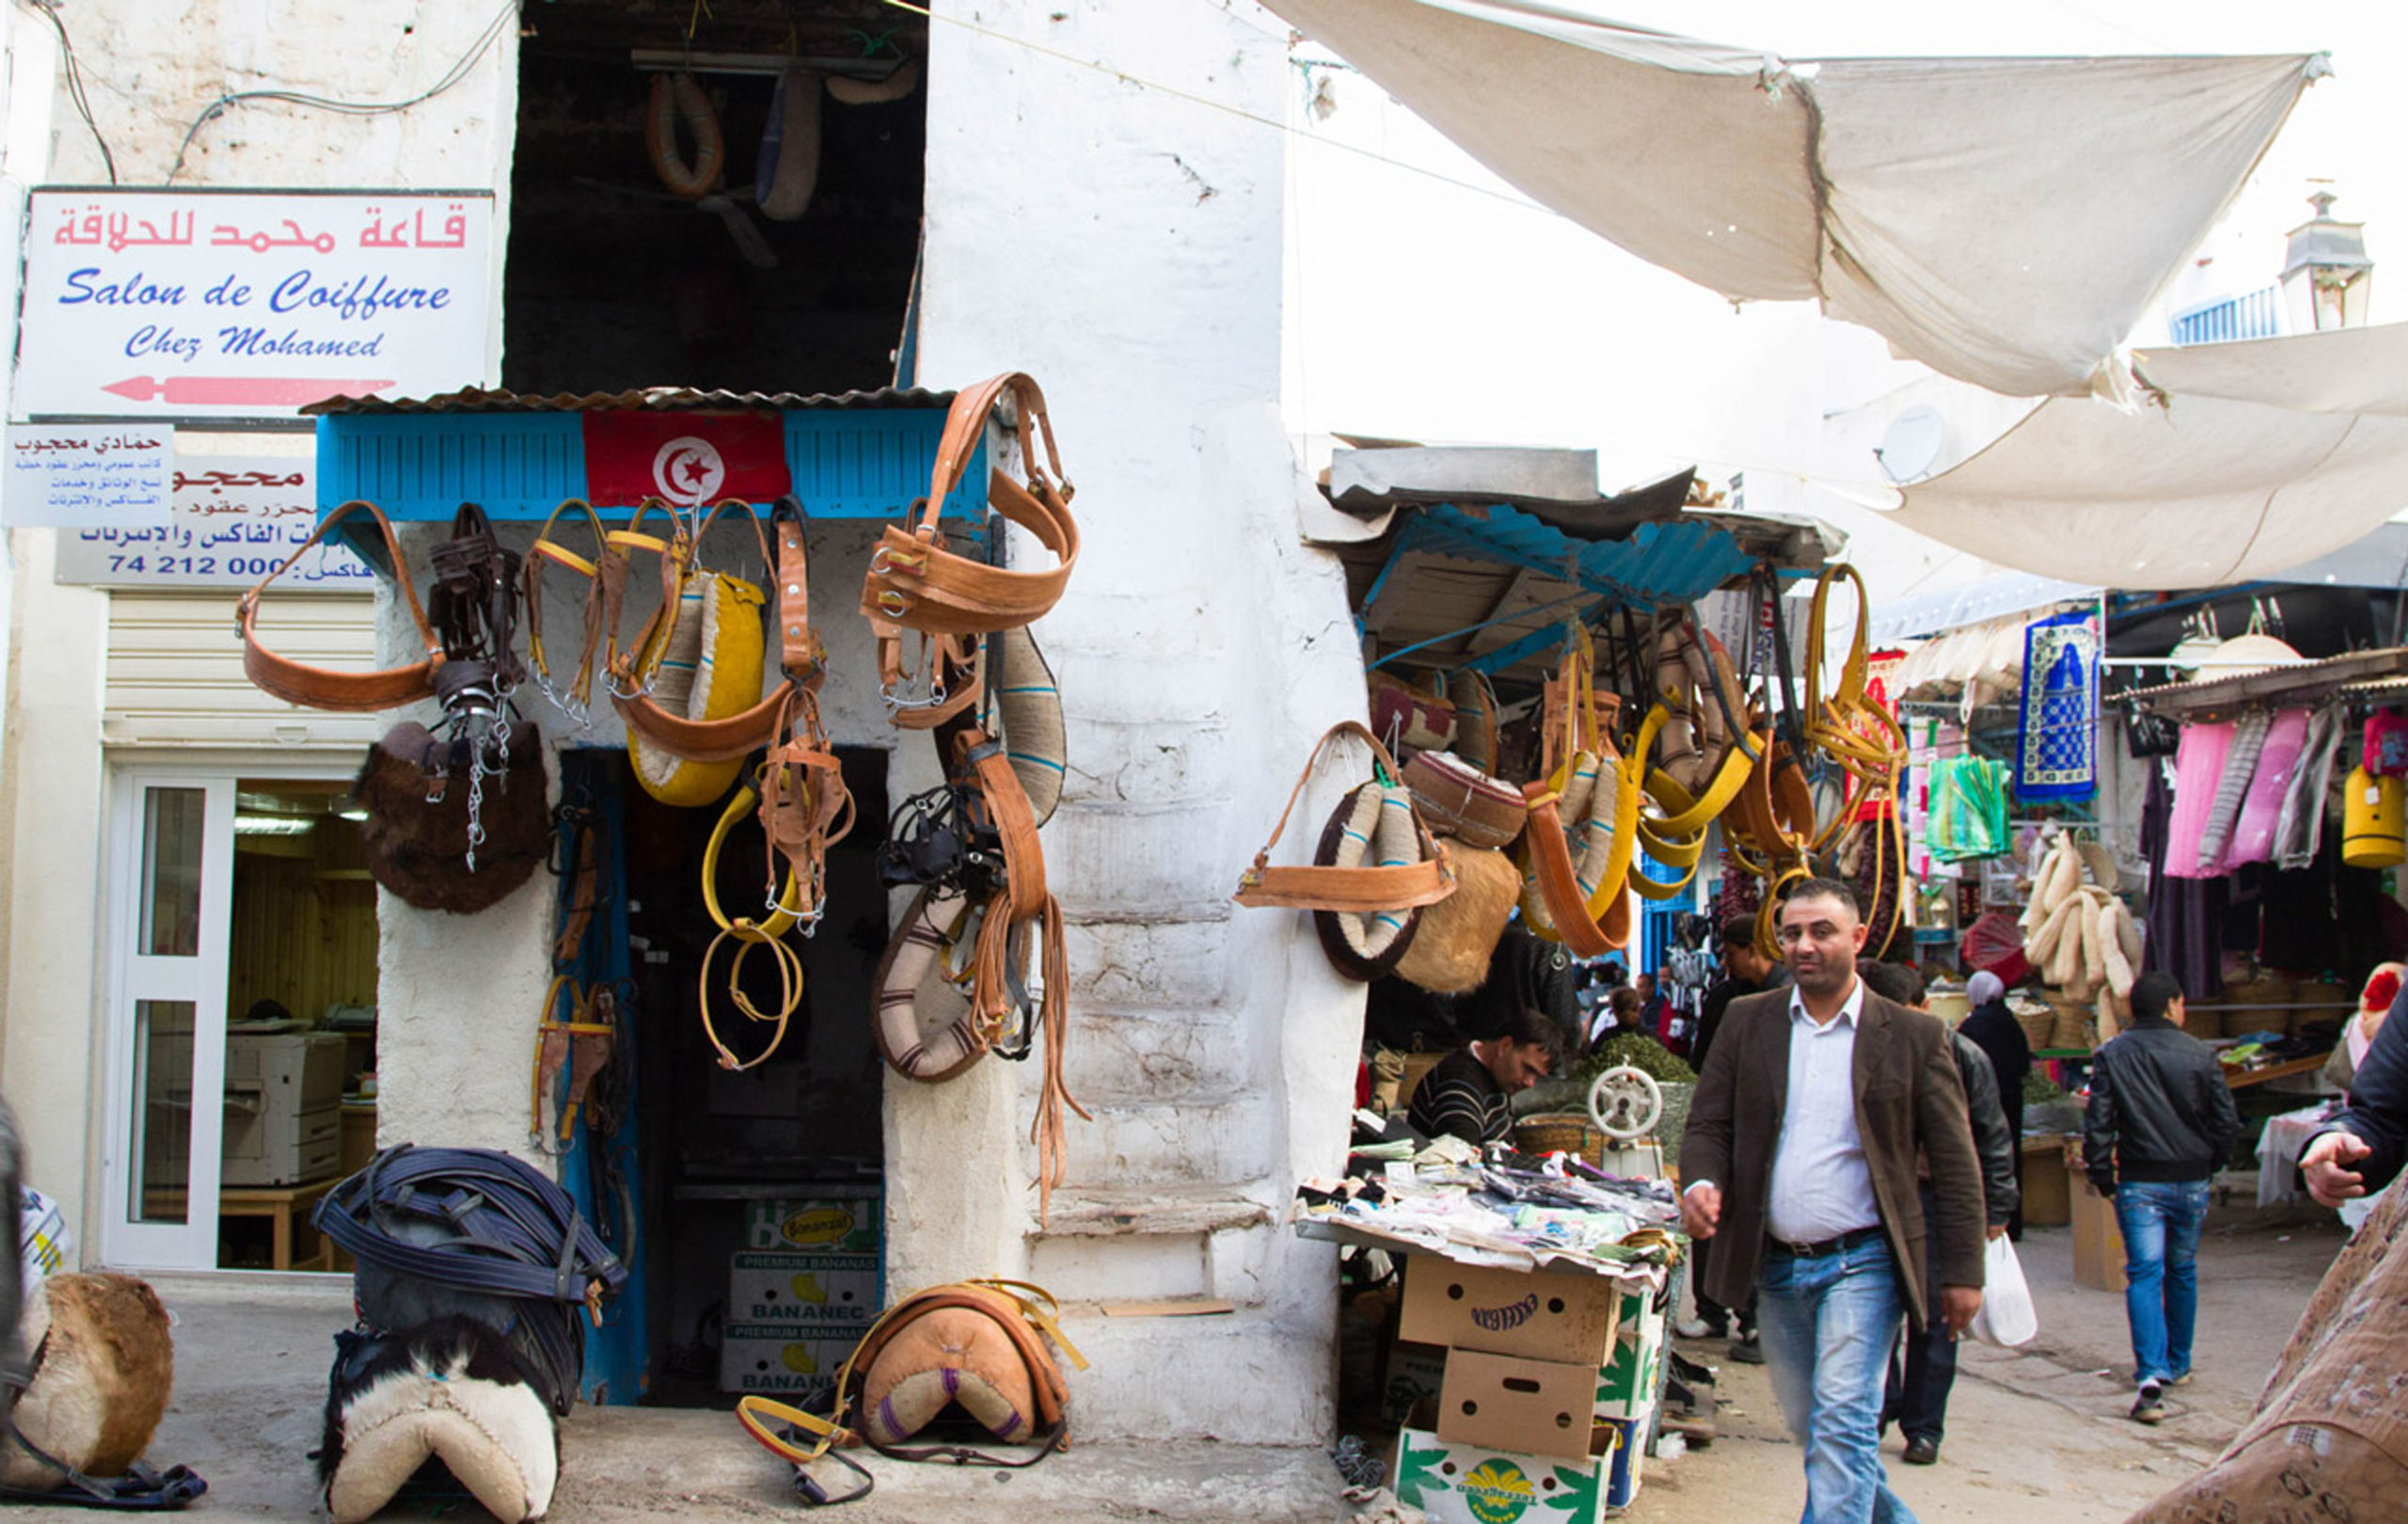 Traveling to Tunisia, this scene of a local souk with handmade animal harnesses is commonplace.